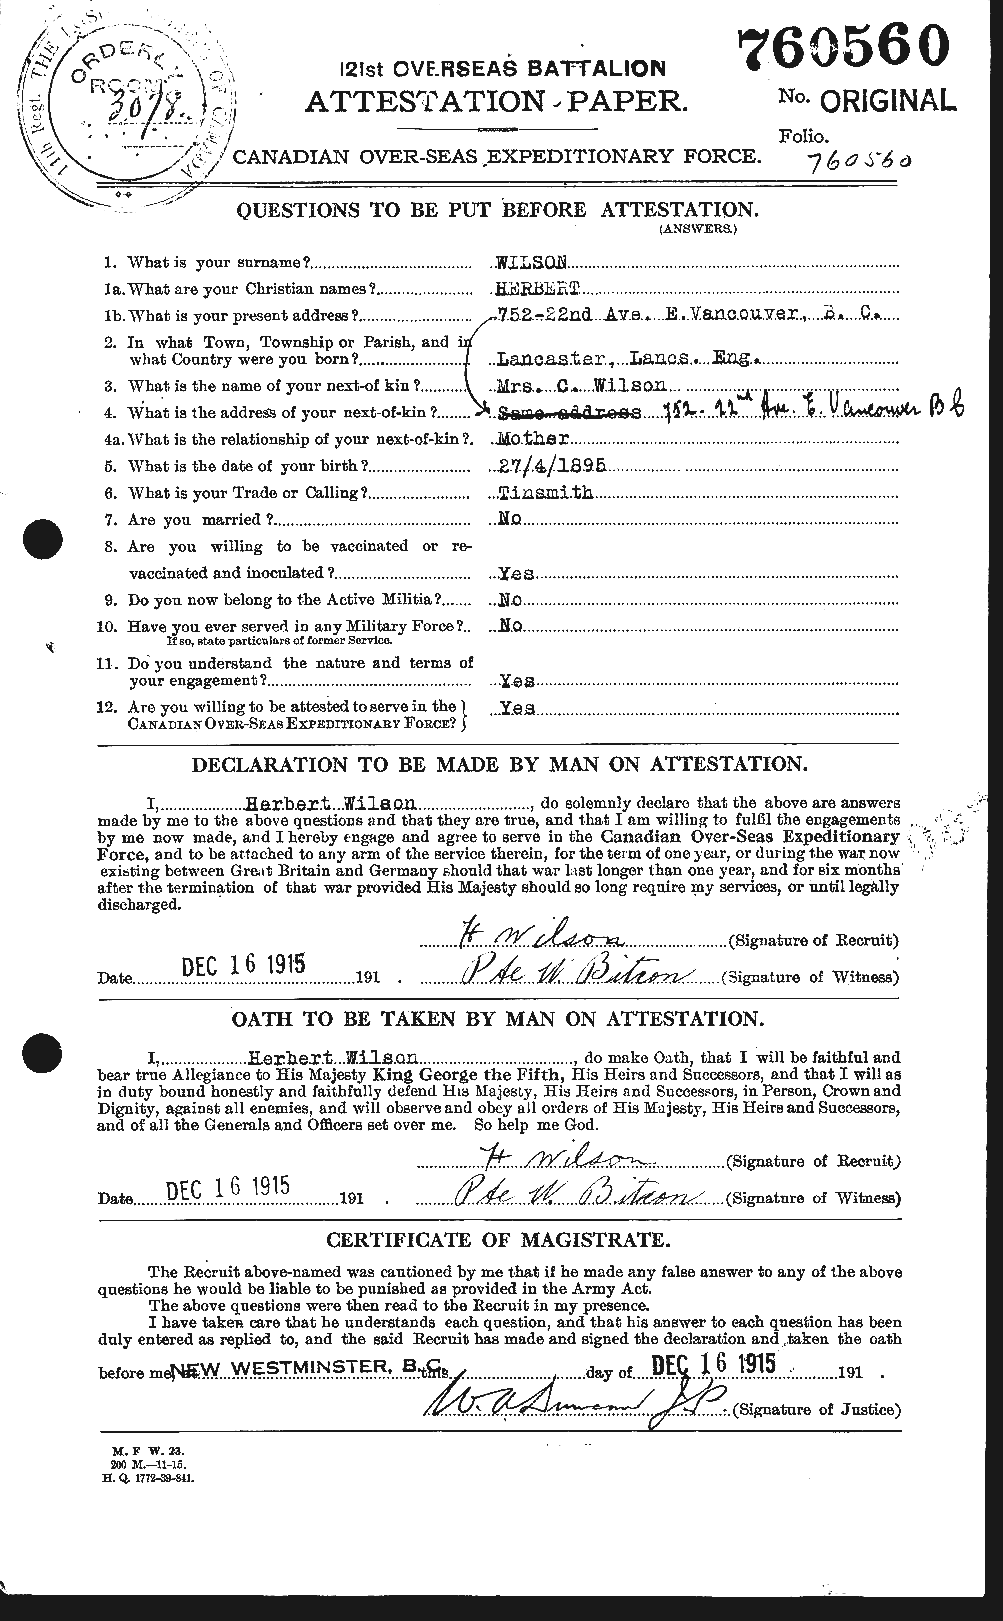 Personnel Records of the First World War - CEF 679549a